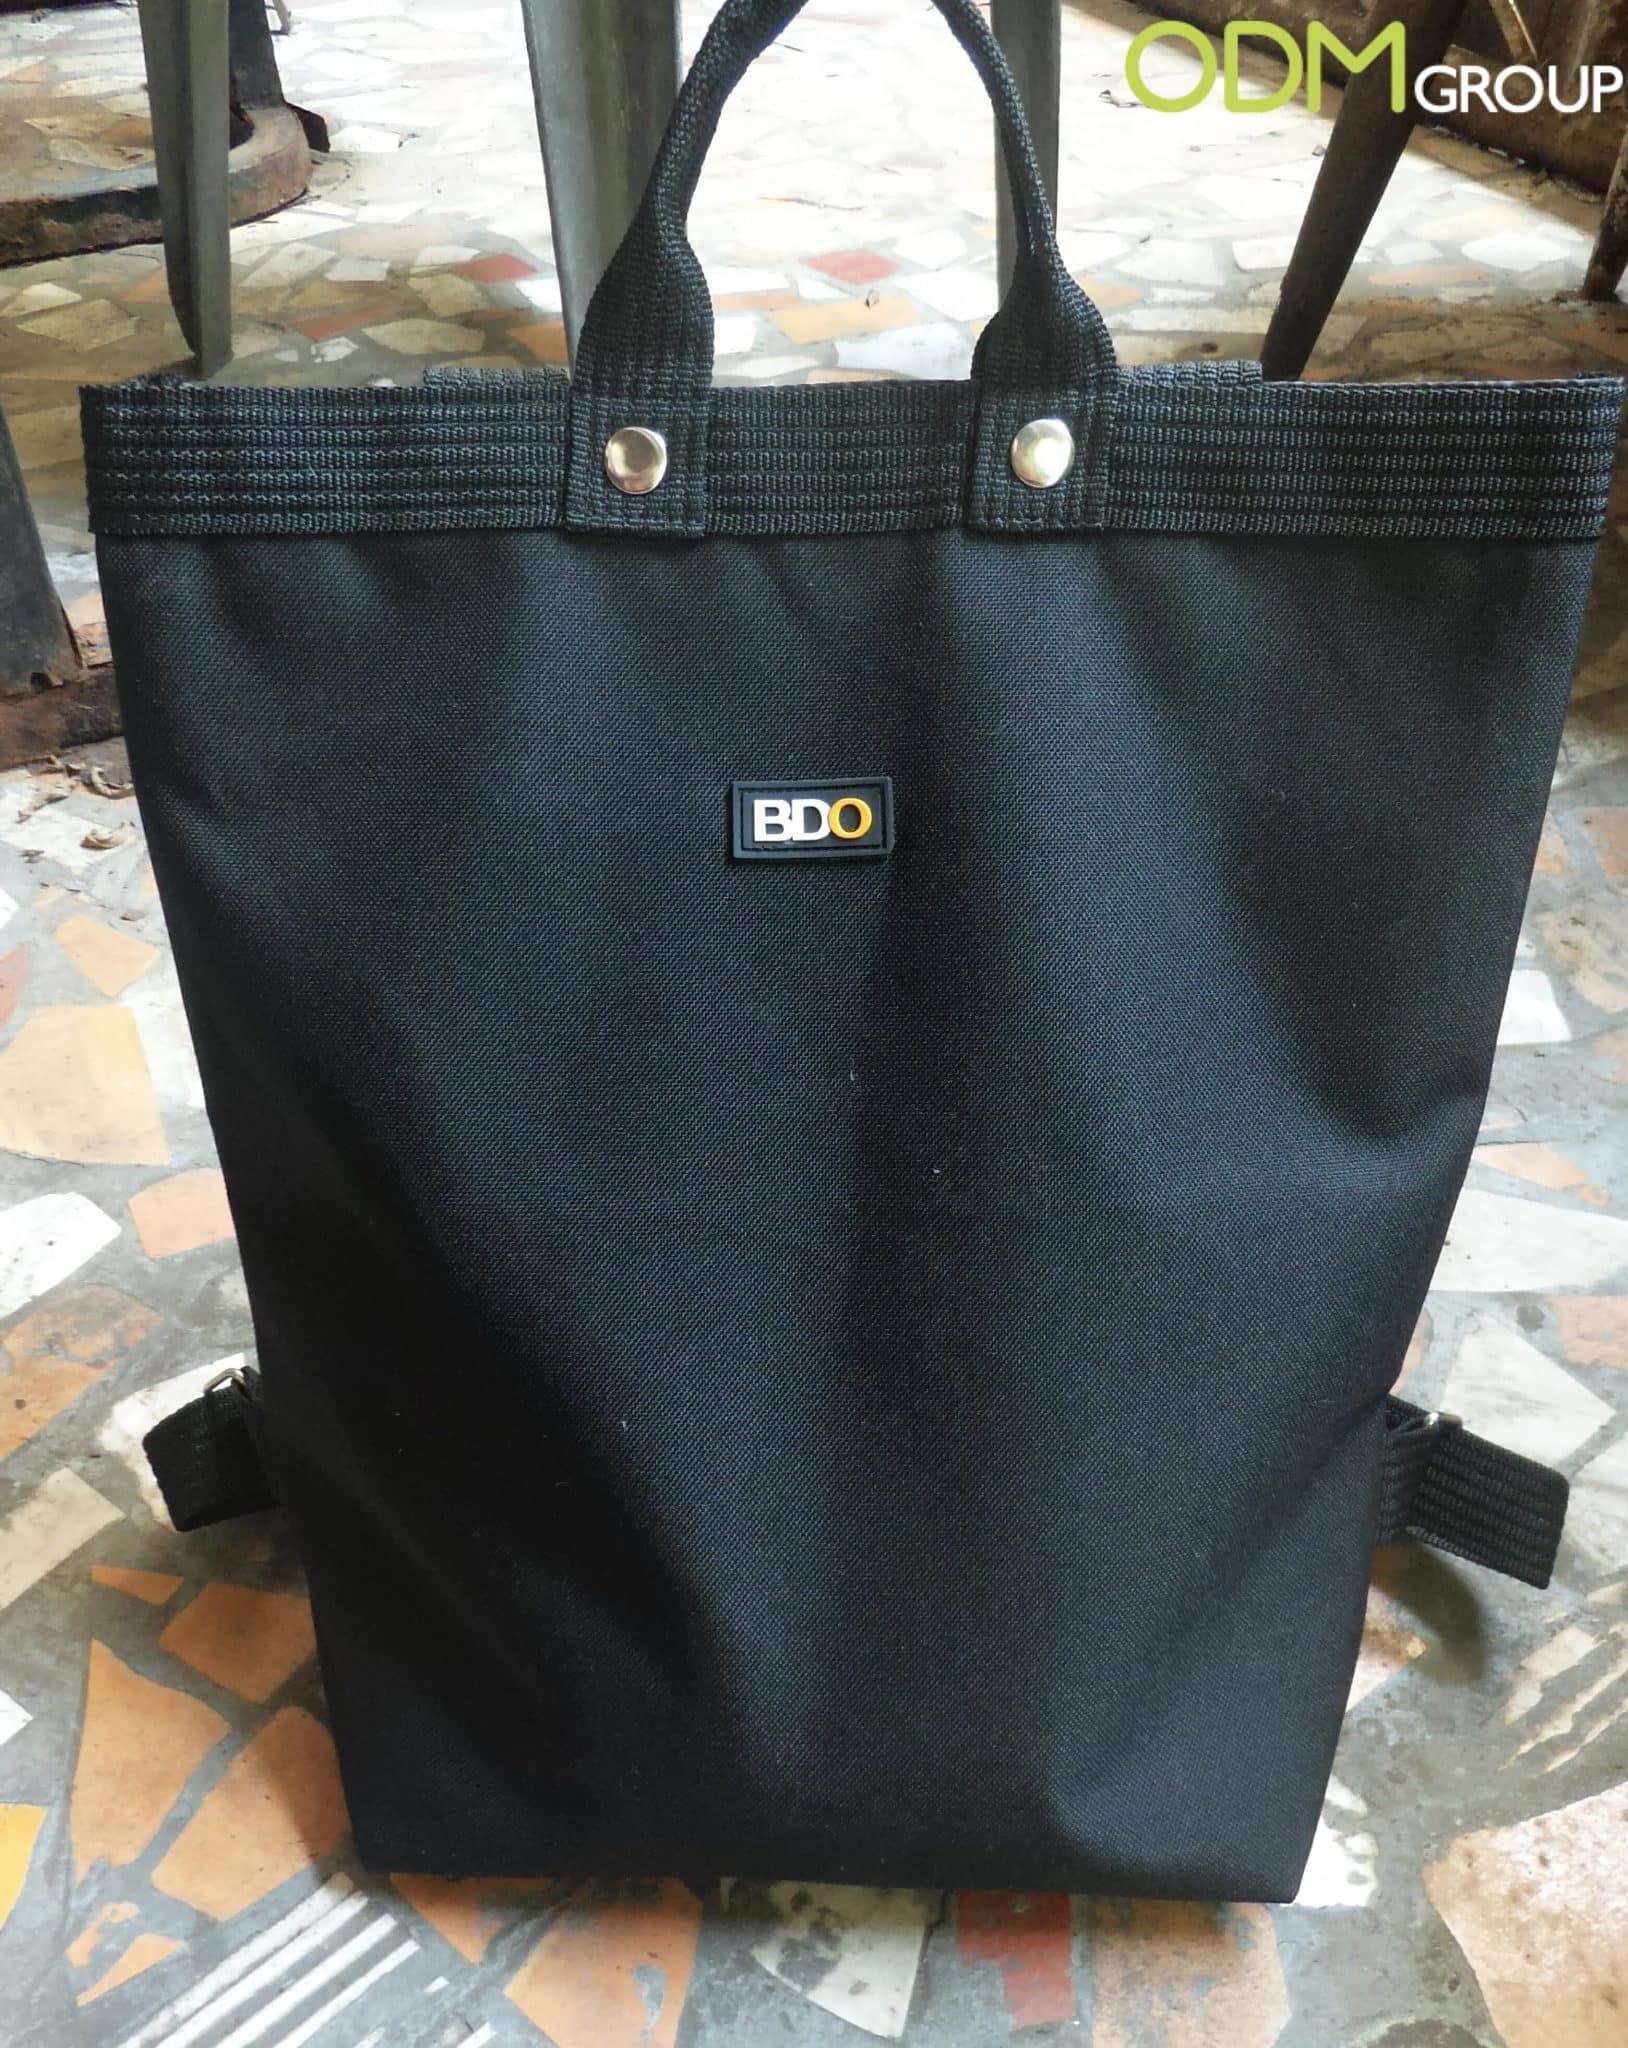 Are your tote bags branded? If not, what's holding you back from